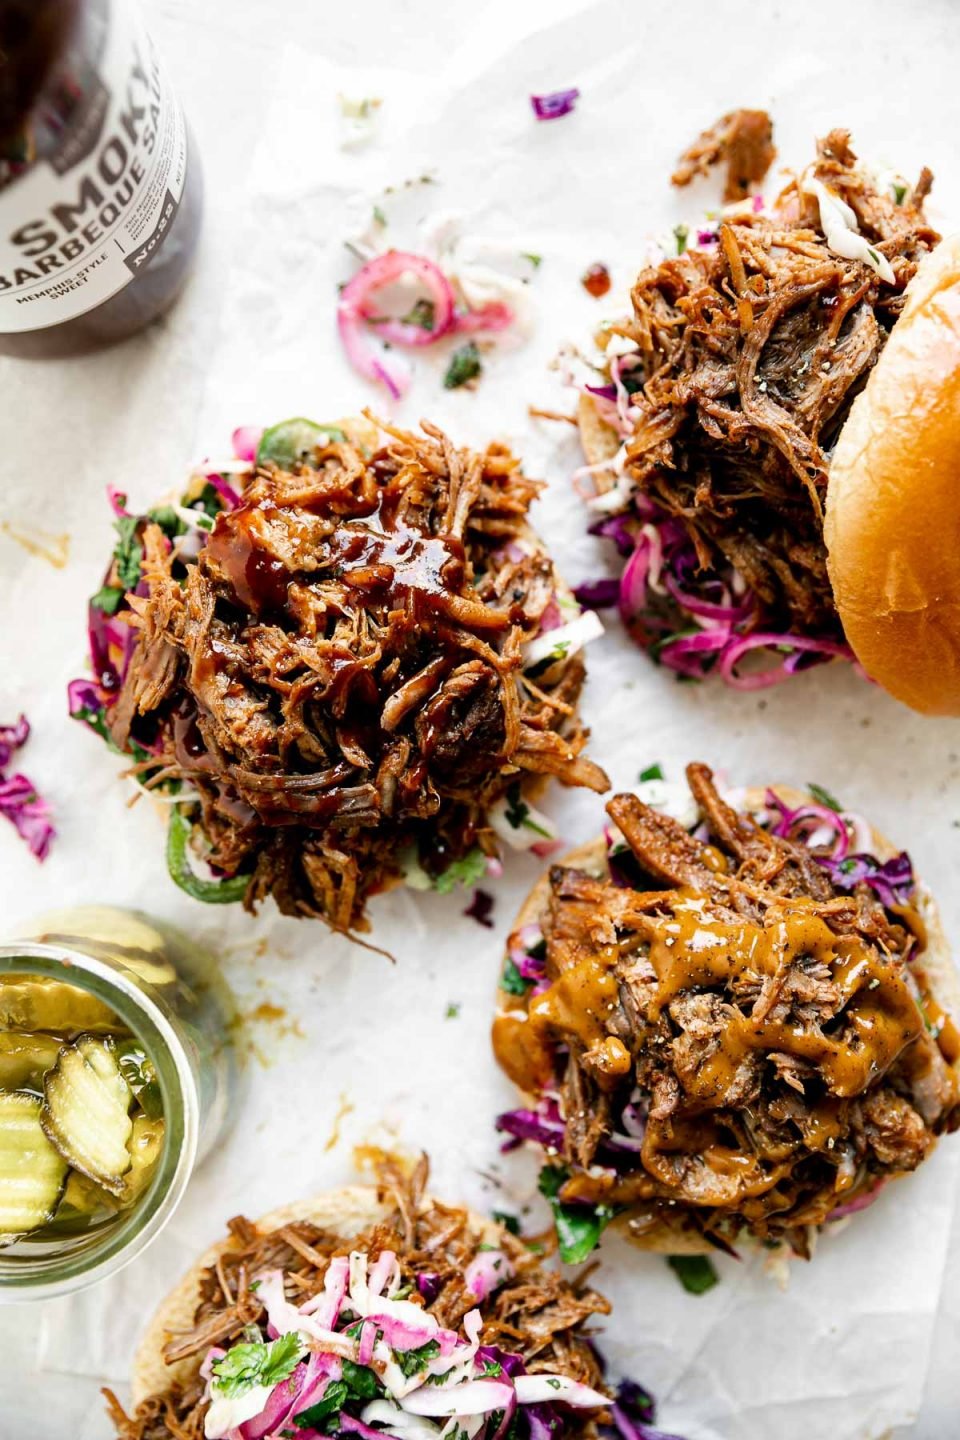 Easy pulled pork shown on 4 open face sandwiches. The pork sits atop buns & slaw on a white surface, alongside a jar of pickles & BBQ sauce.